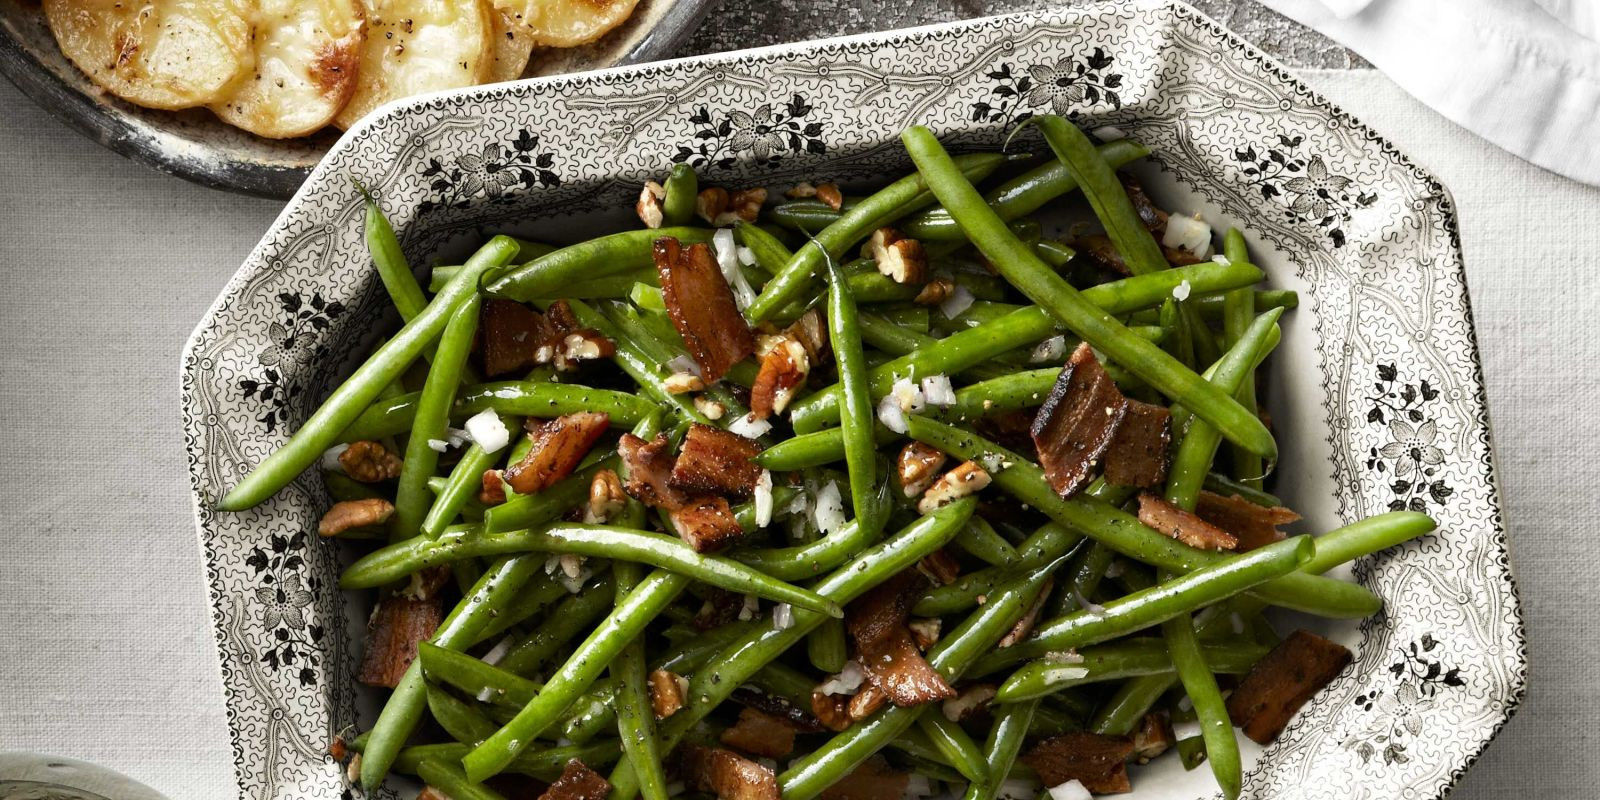 Thanksgiving Green Bean Recipe
 27 Easy Green Bean Recipes for Thanksgiving How to Cook